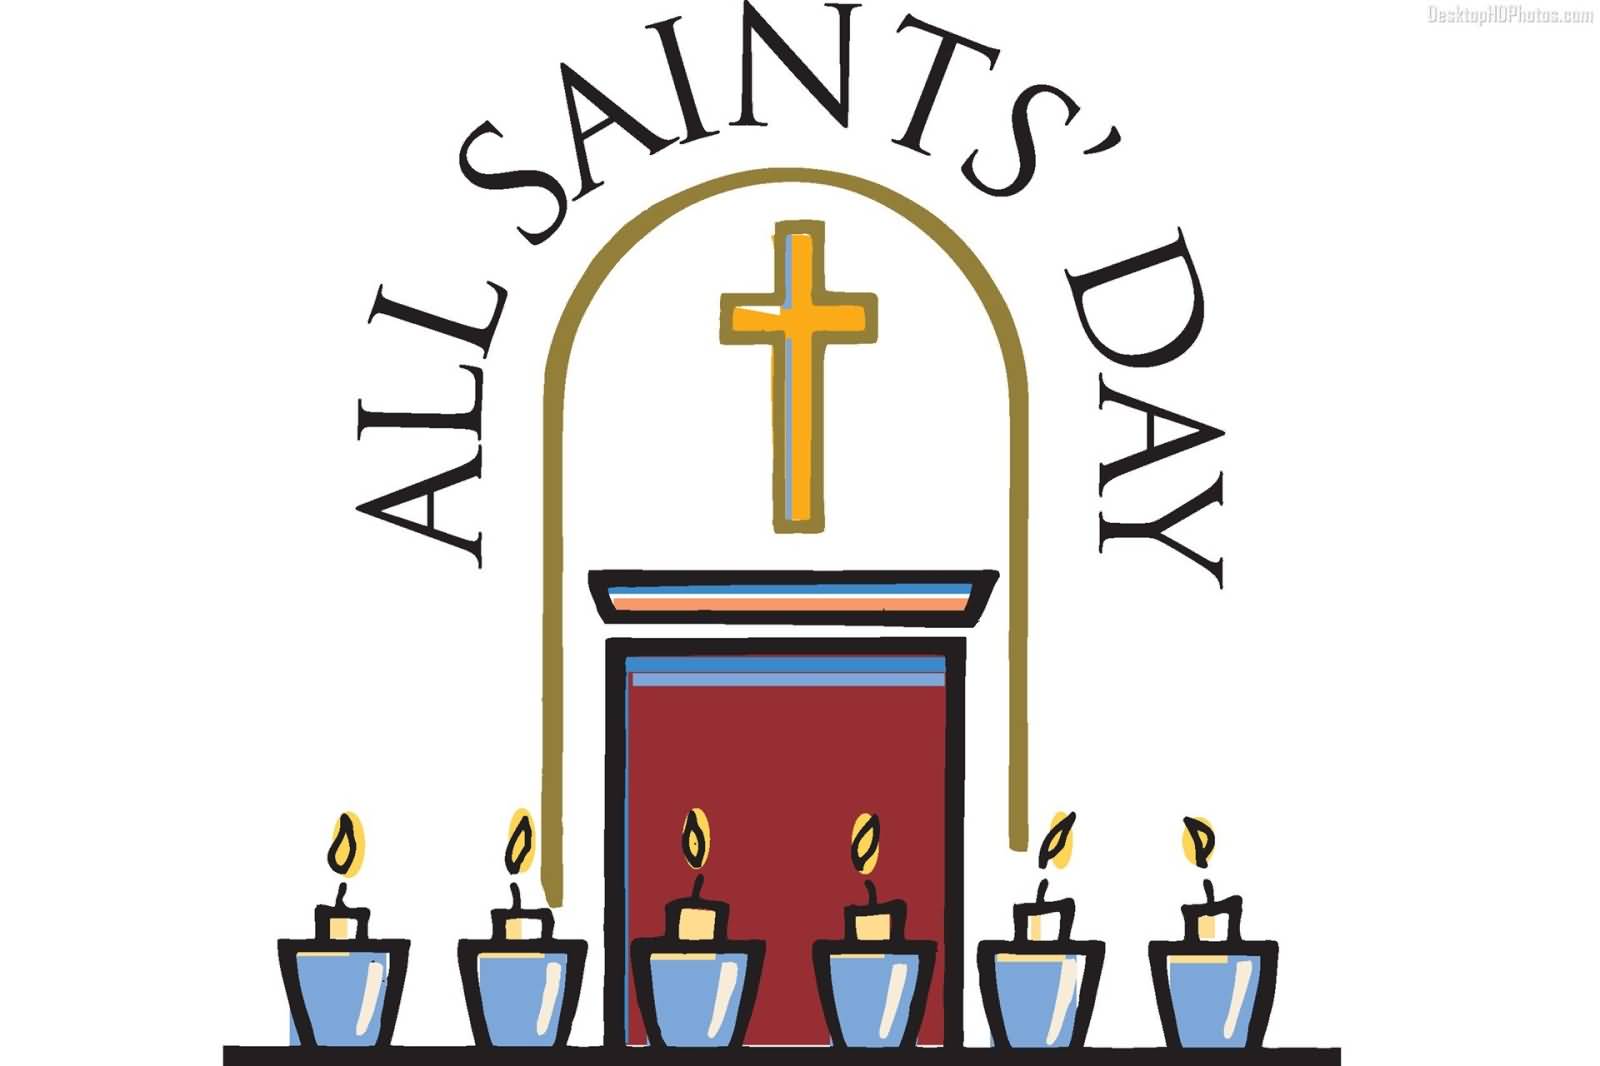 Best All Saints Day Wish Picture